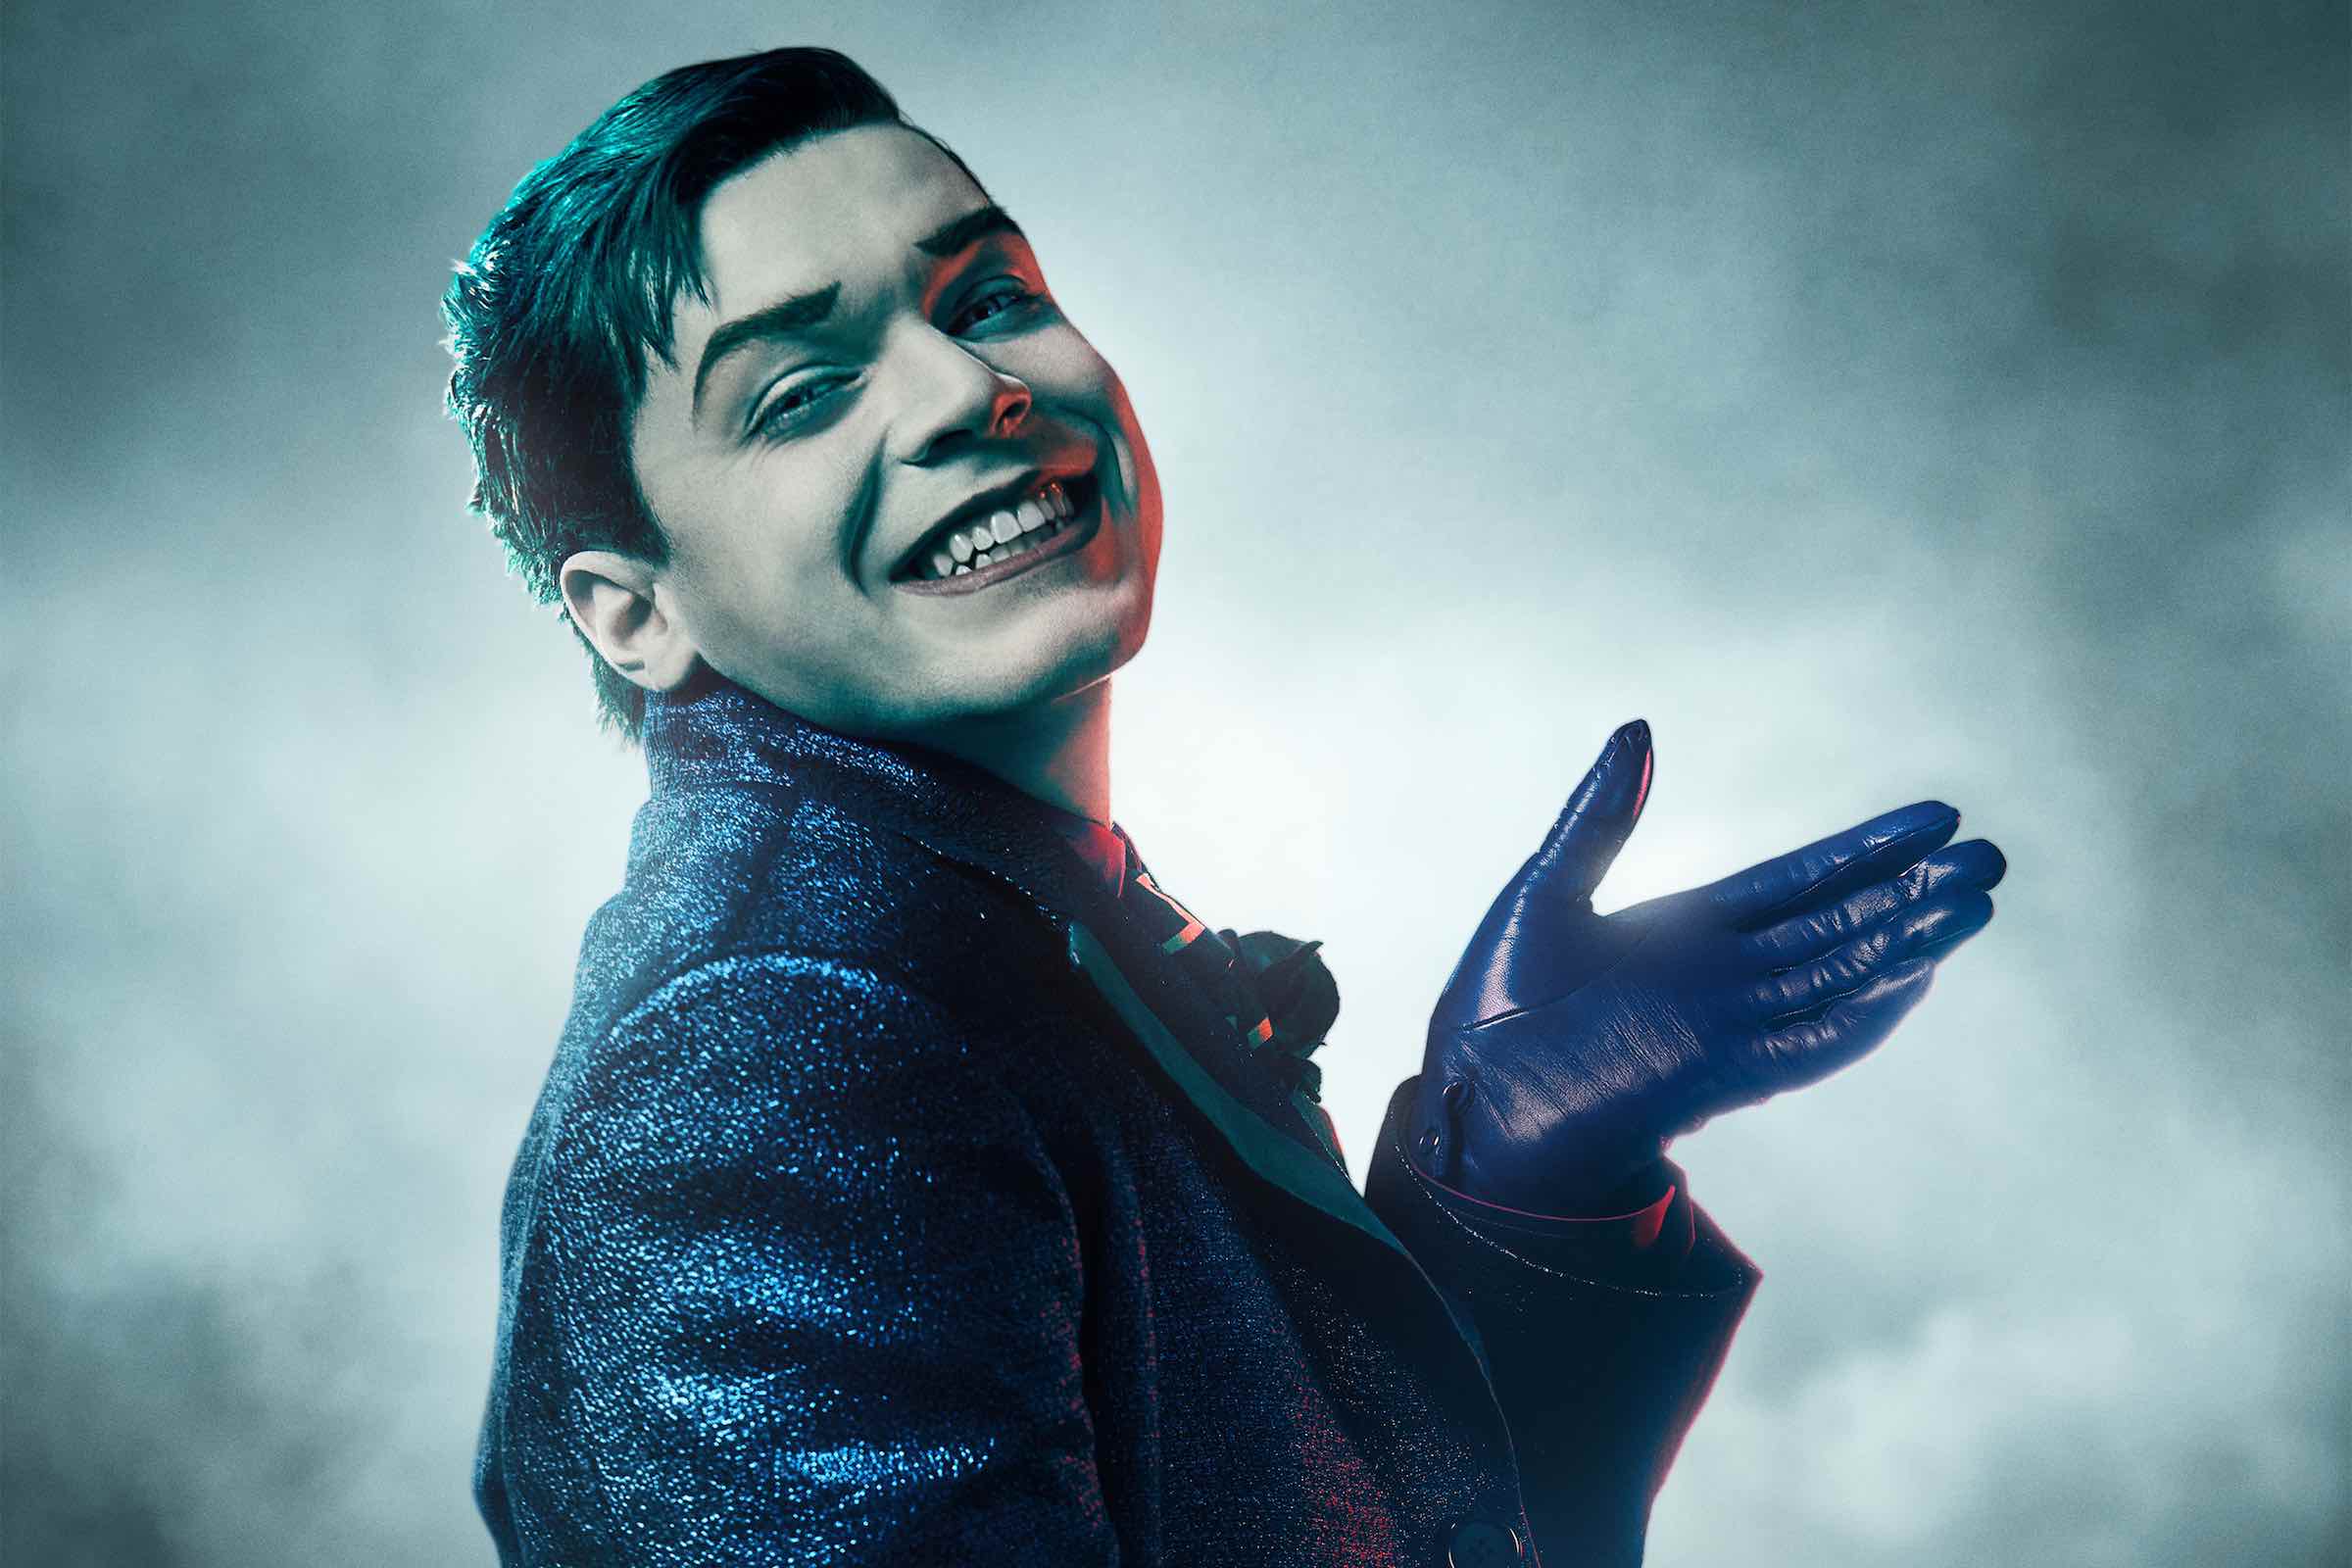 'Gotham' is packed with a host of a variety of characters capable of expressing plenty of emotion, and it deserves a spot in the 2019 Bingewatch Awards.